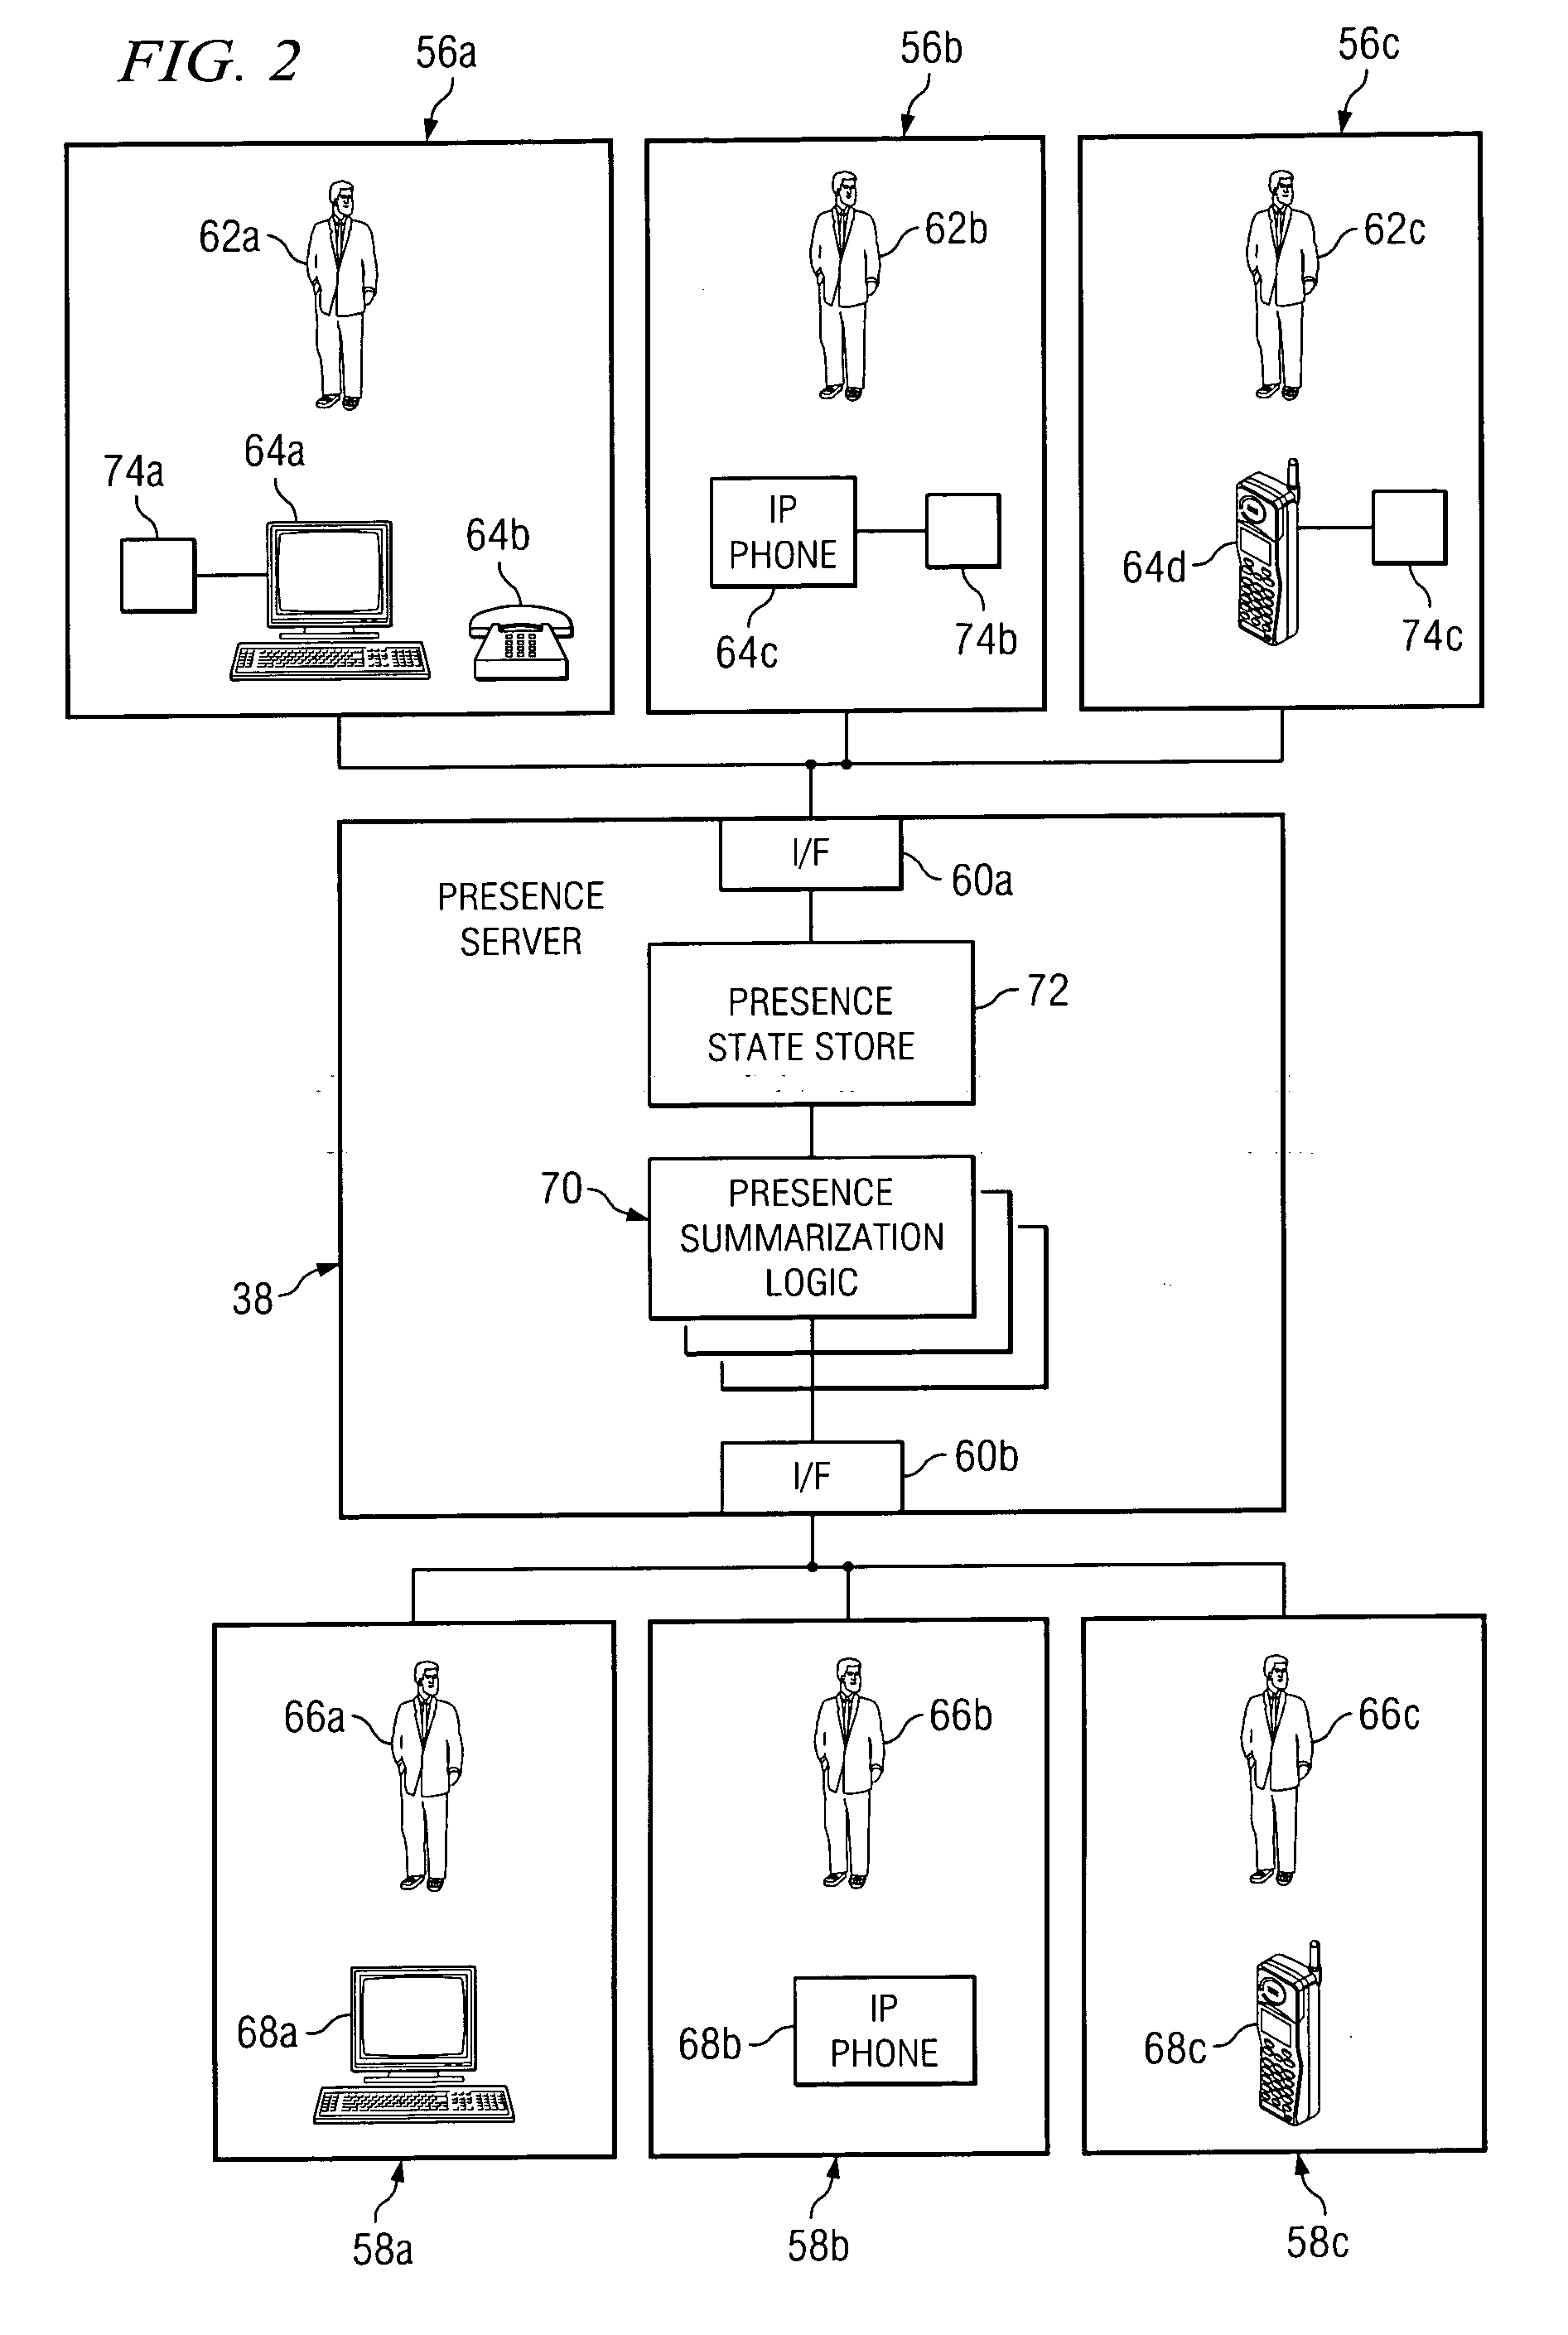 Method and system to protect the privacy of presence information for network users